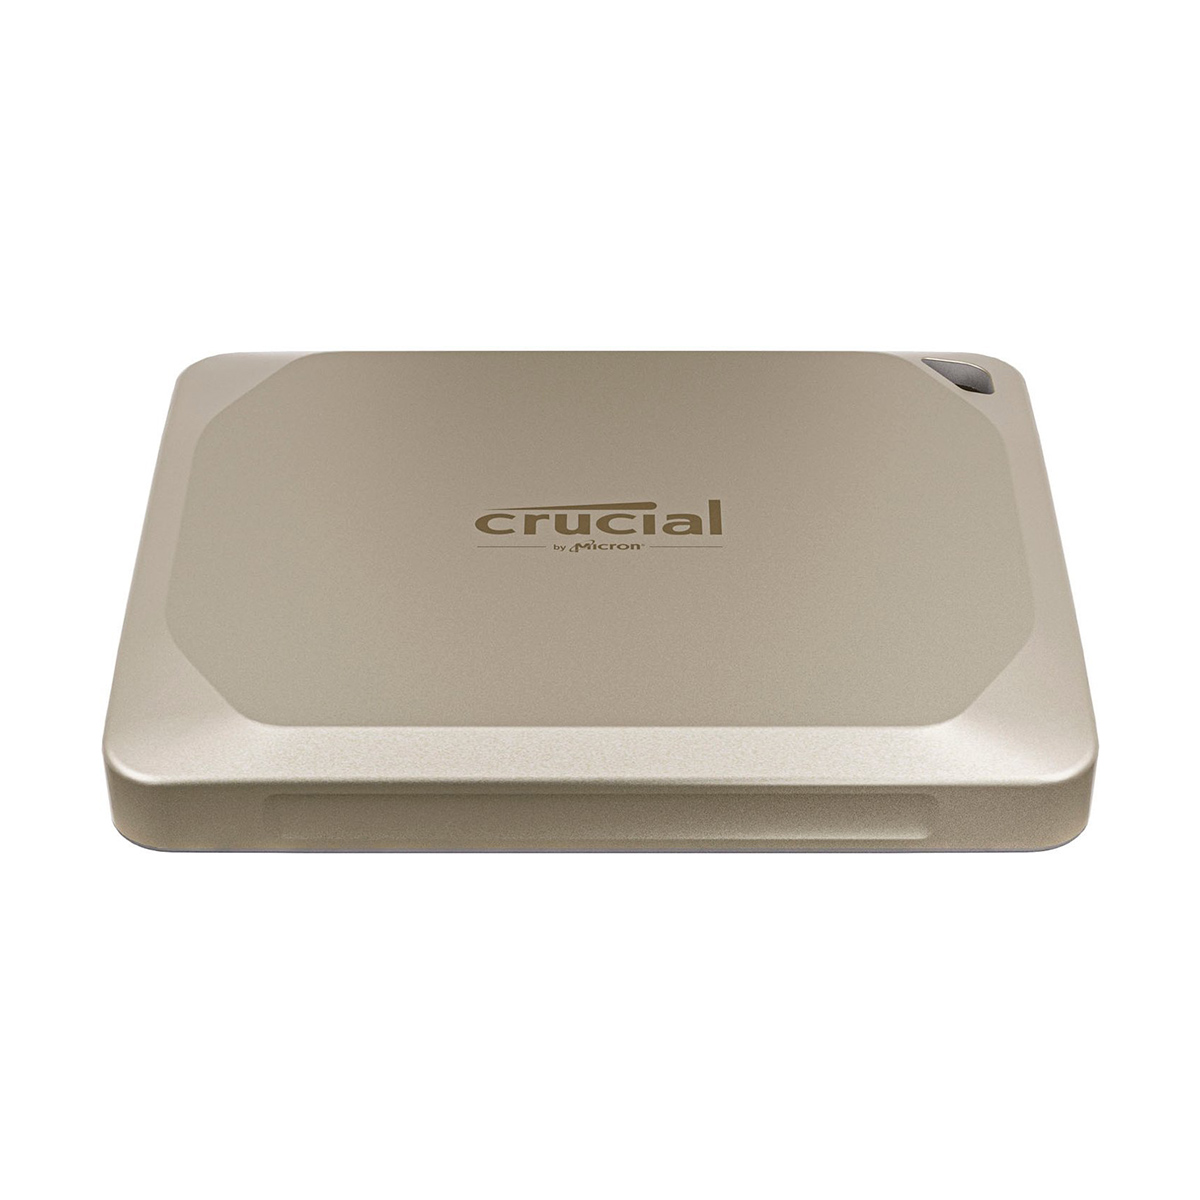 SSD Crucial X9 Pro for Mac